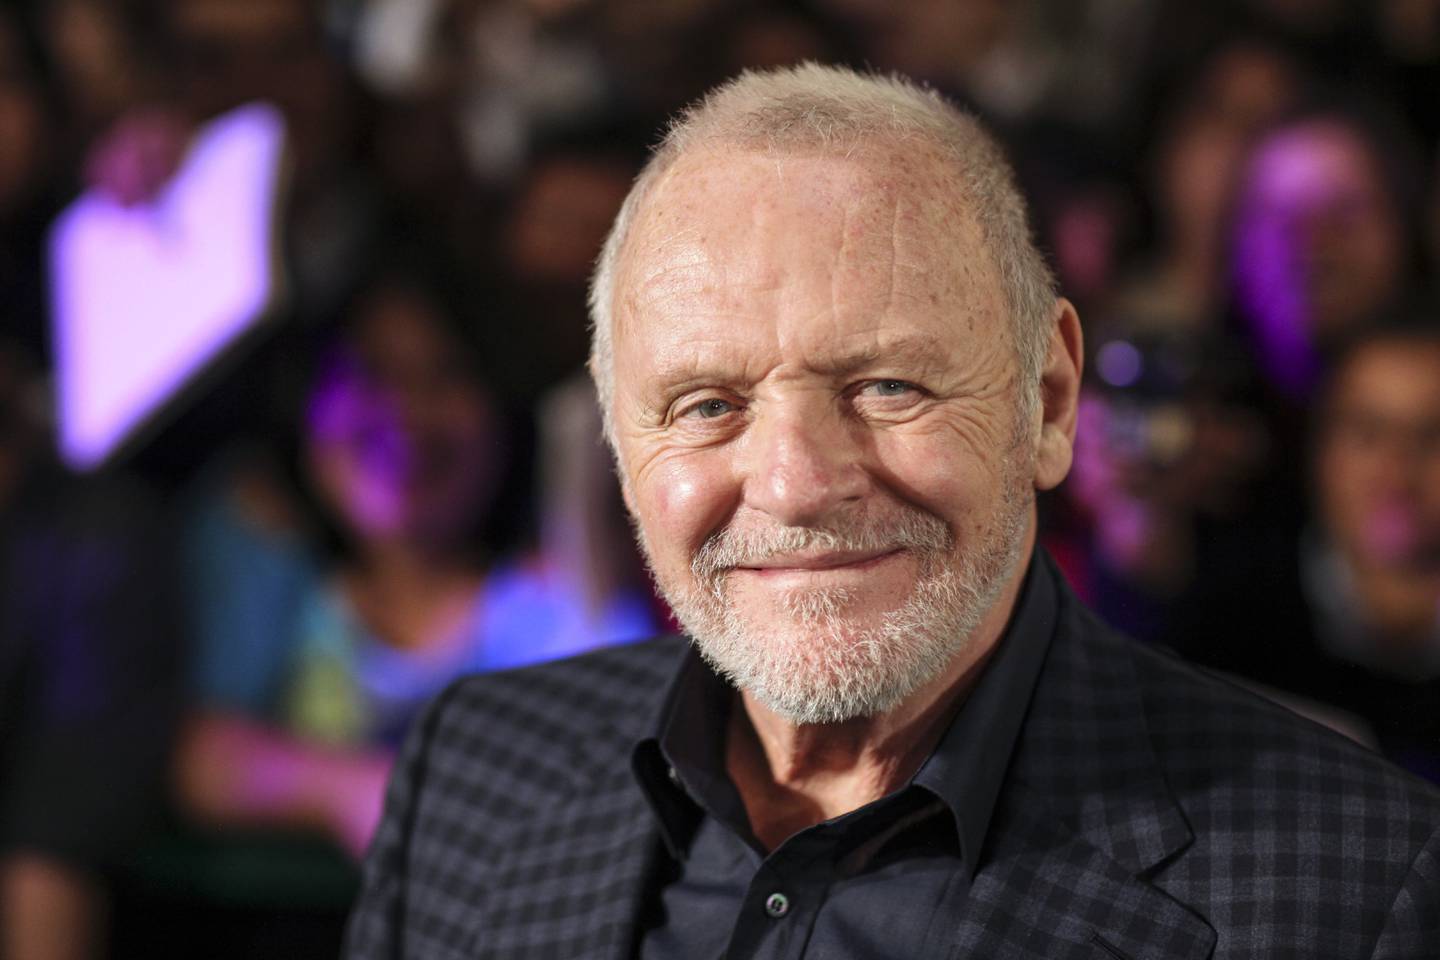 Two-time Best Actor winner at the Oscar awards, Sir Anthony Hopkins, has his birthday on New Year's Eve. AP